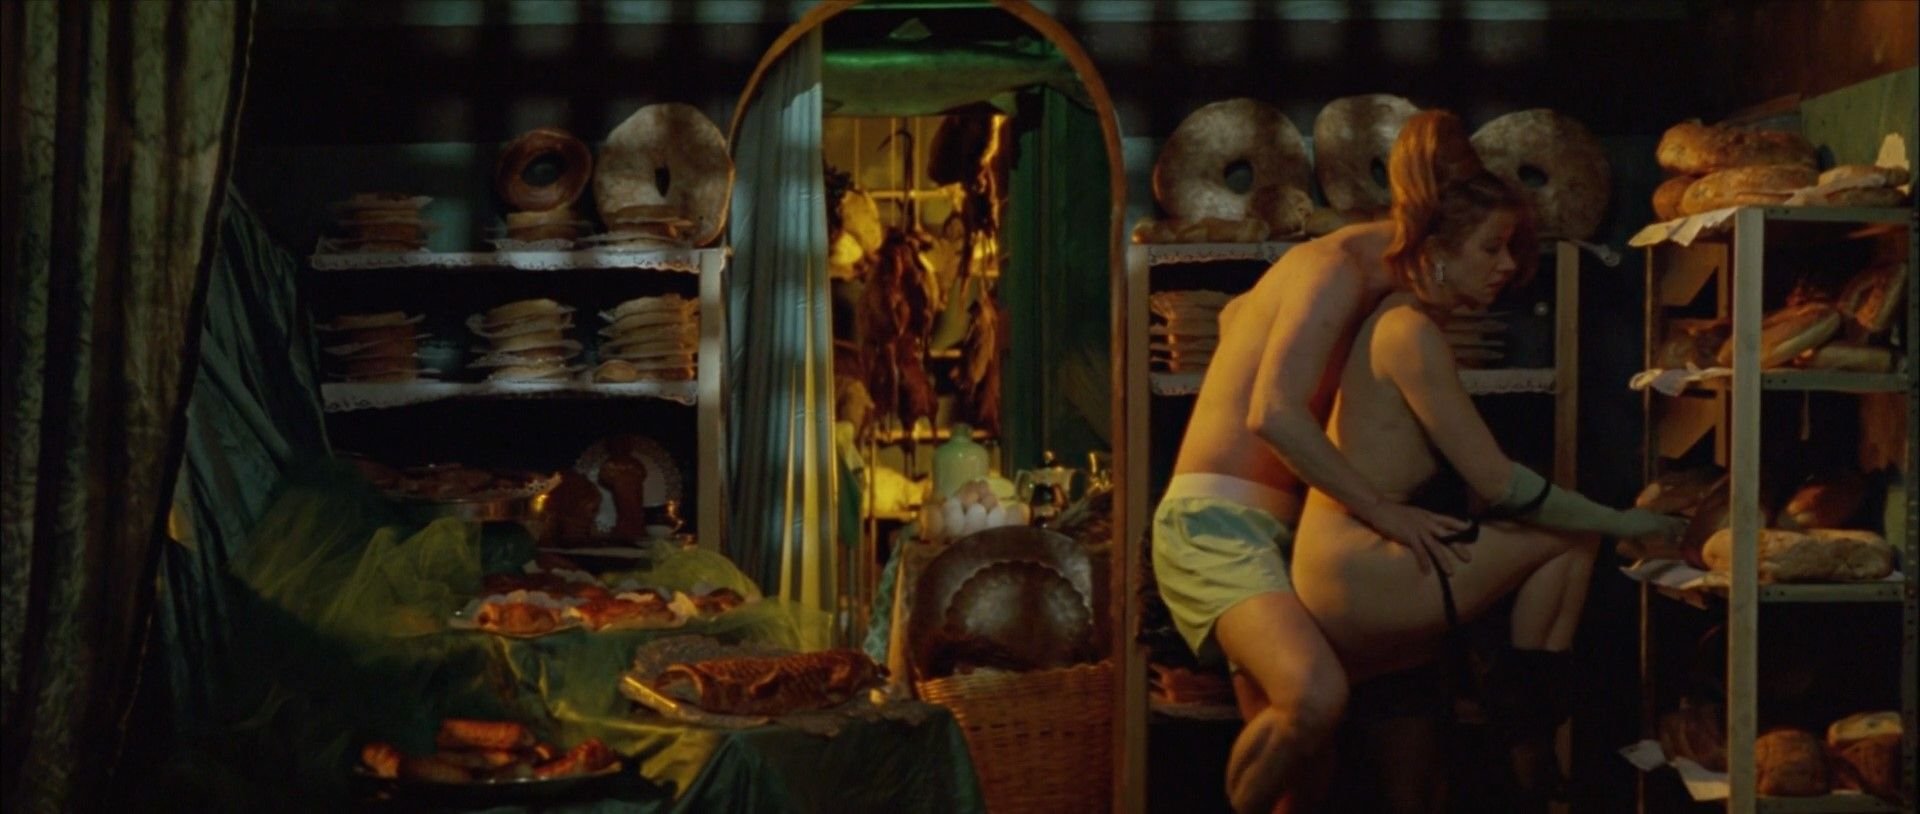 Helen Mirren Nude - The Cook, the Thief, His Wife  Her Lover (9 Pics + GIF  Video)